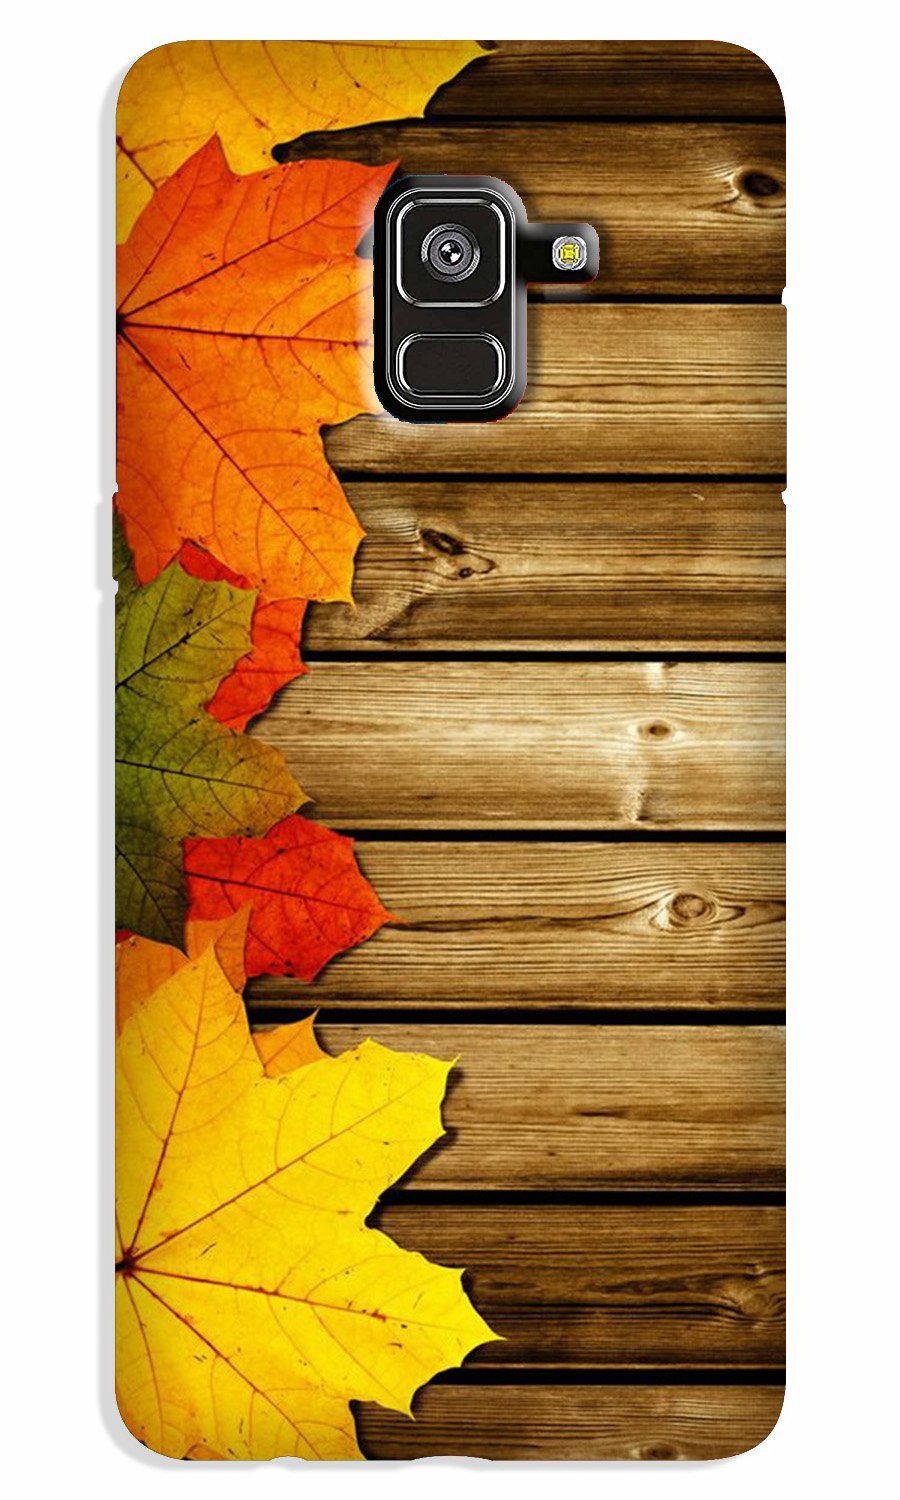 Wooden look3 Case for Galaxy J6 / On6